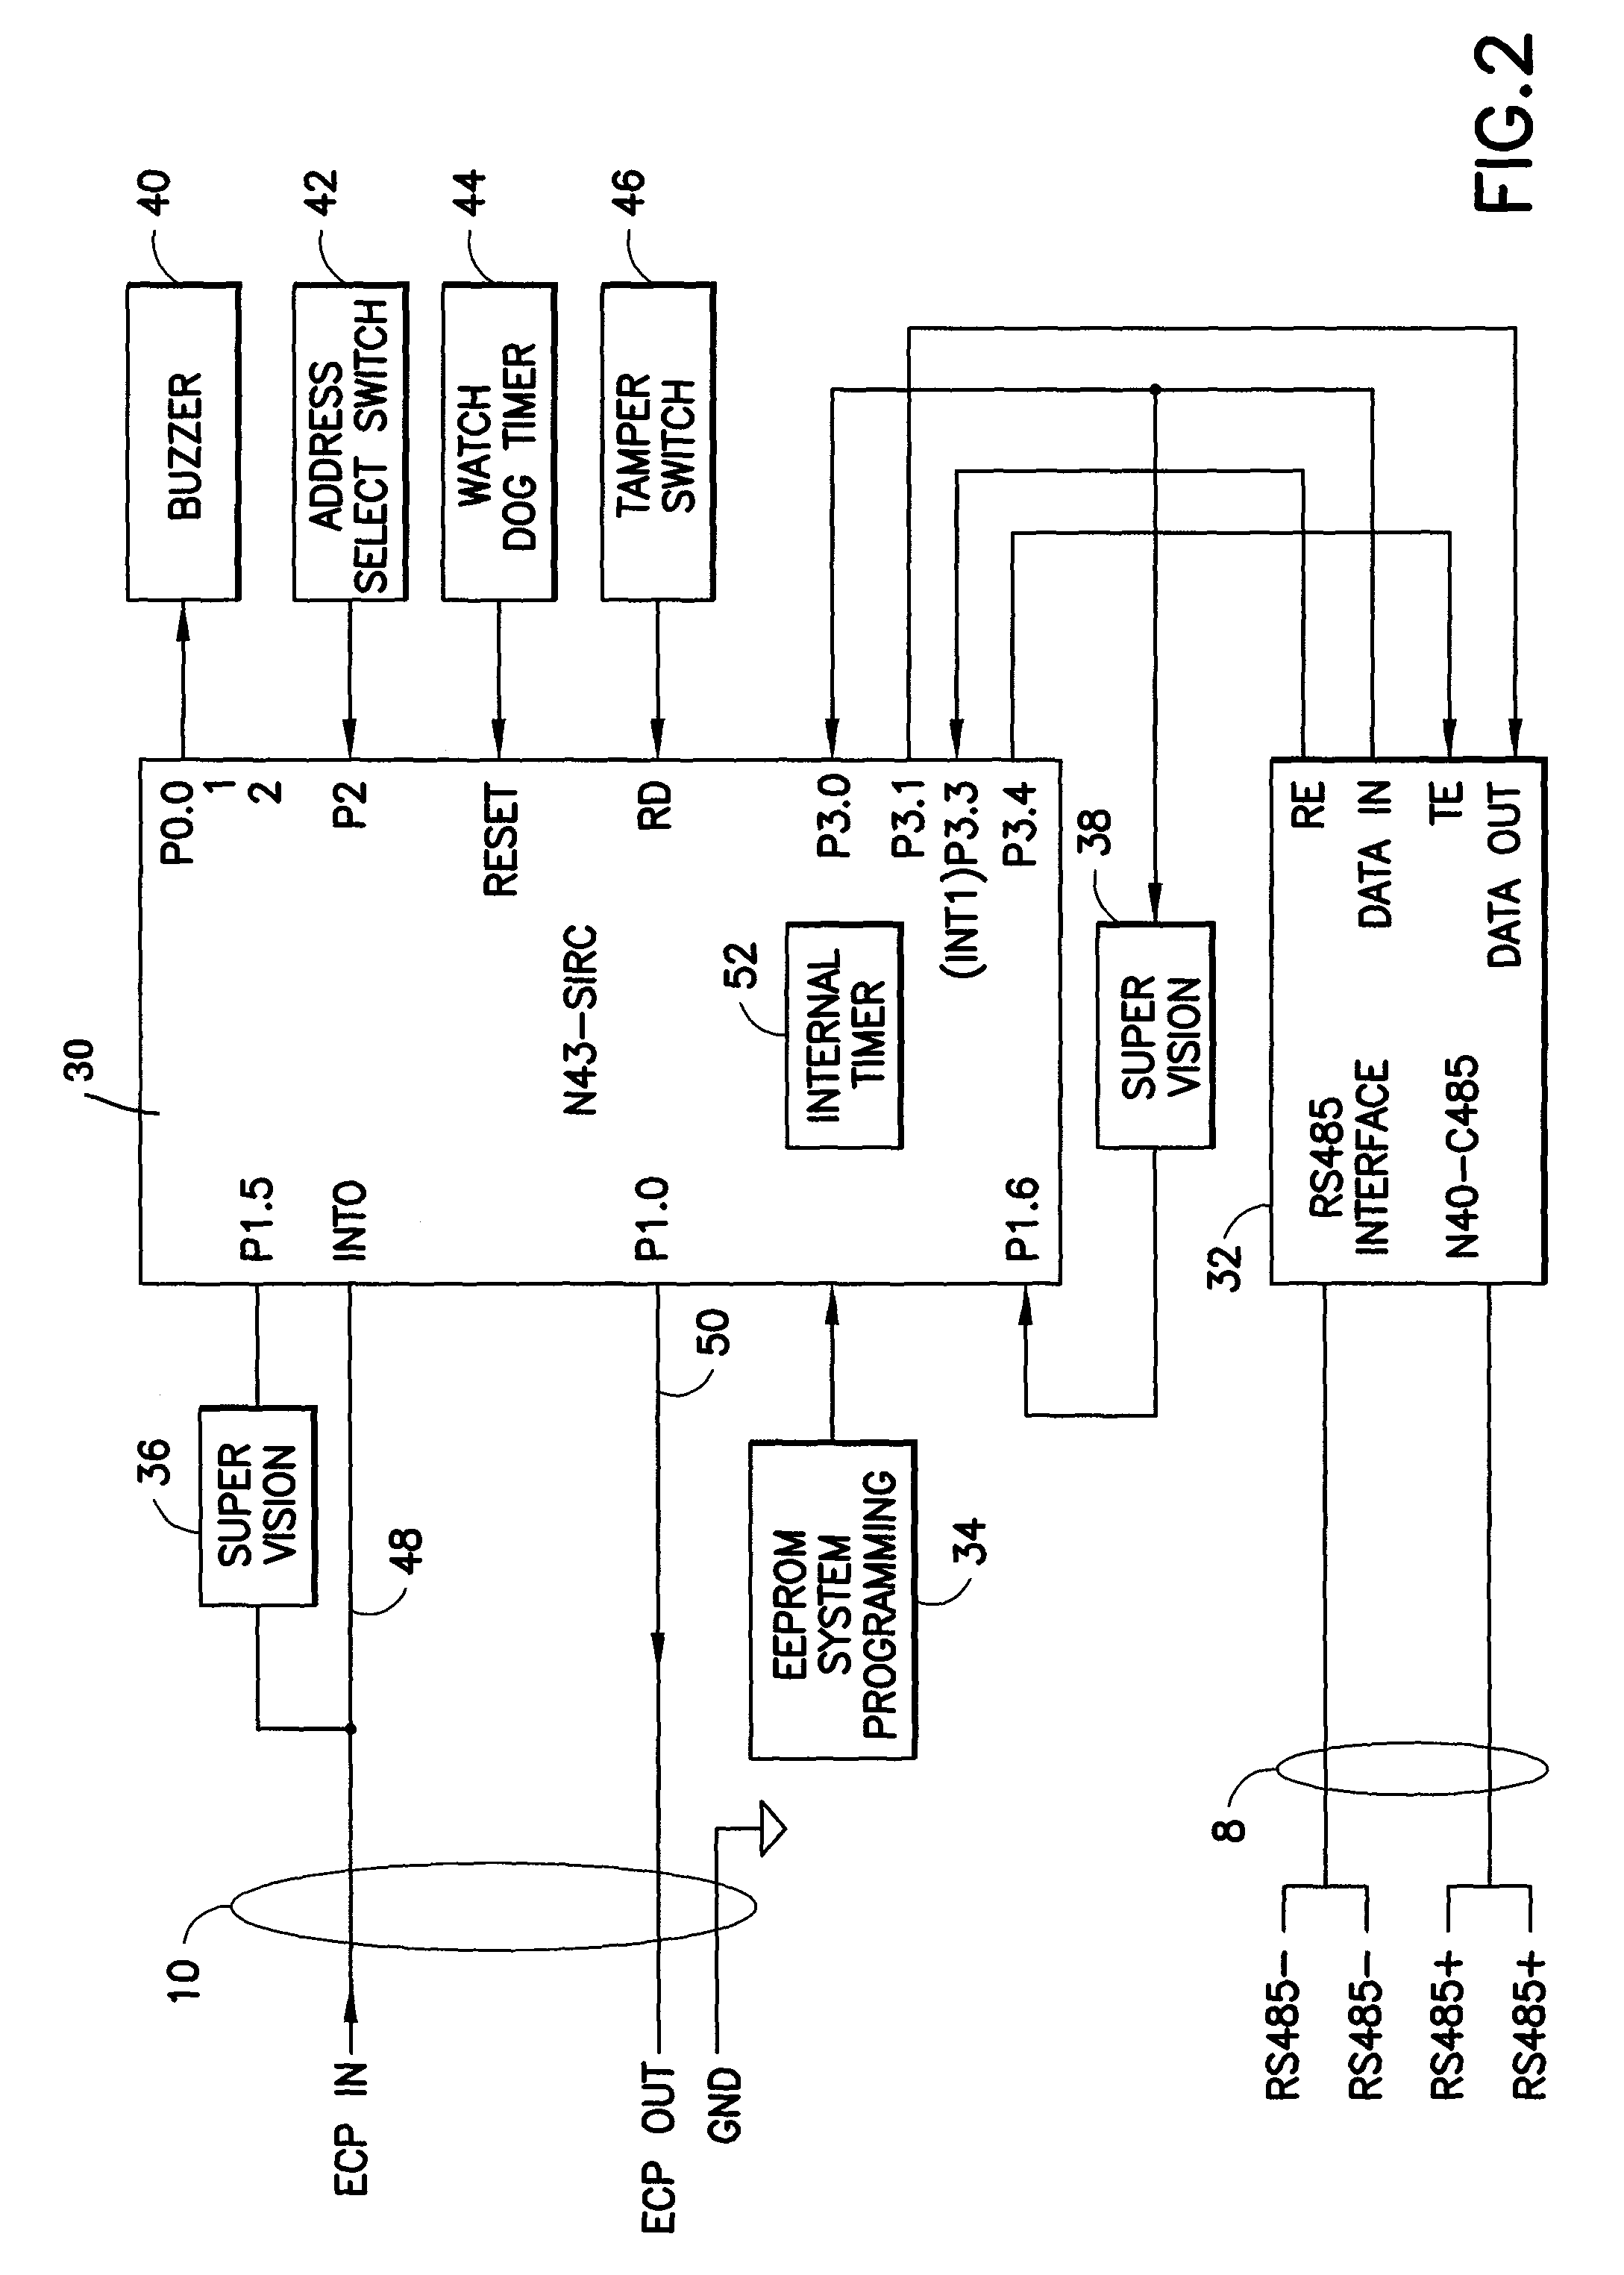 System and method for panel linking in a security system